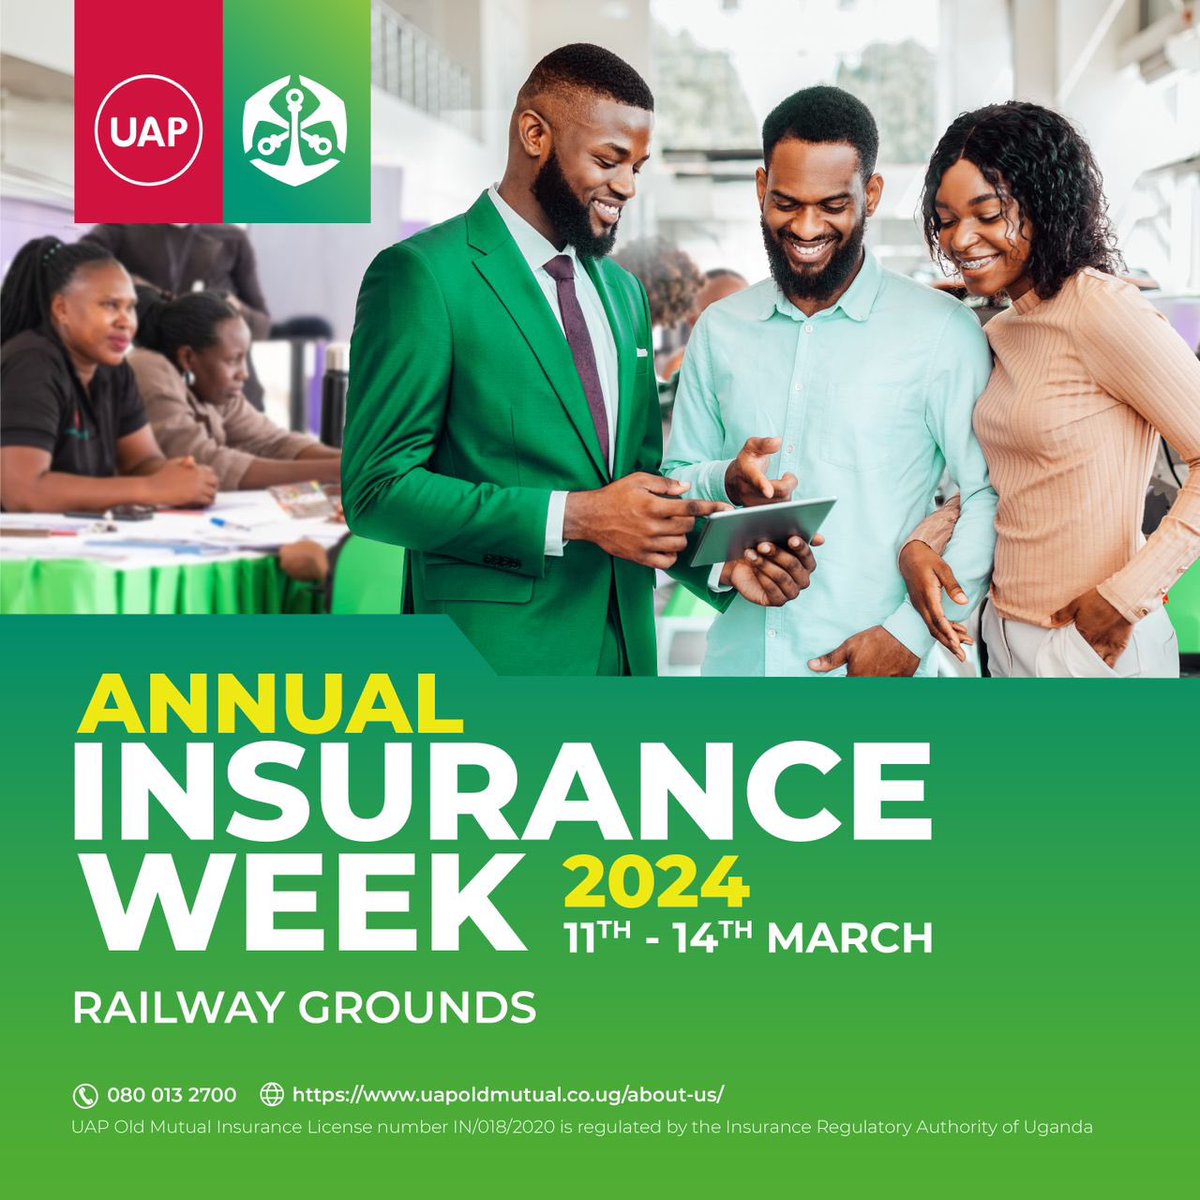 Join @UAPOldMutualUg at Railway Grounds for the Insurance Week, from 11th-14th March 2024. Pass by and learn more about insurance. 

#AnnualInsuranceWeek2024 #TutambuleFfena